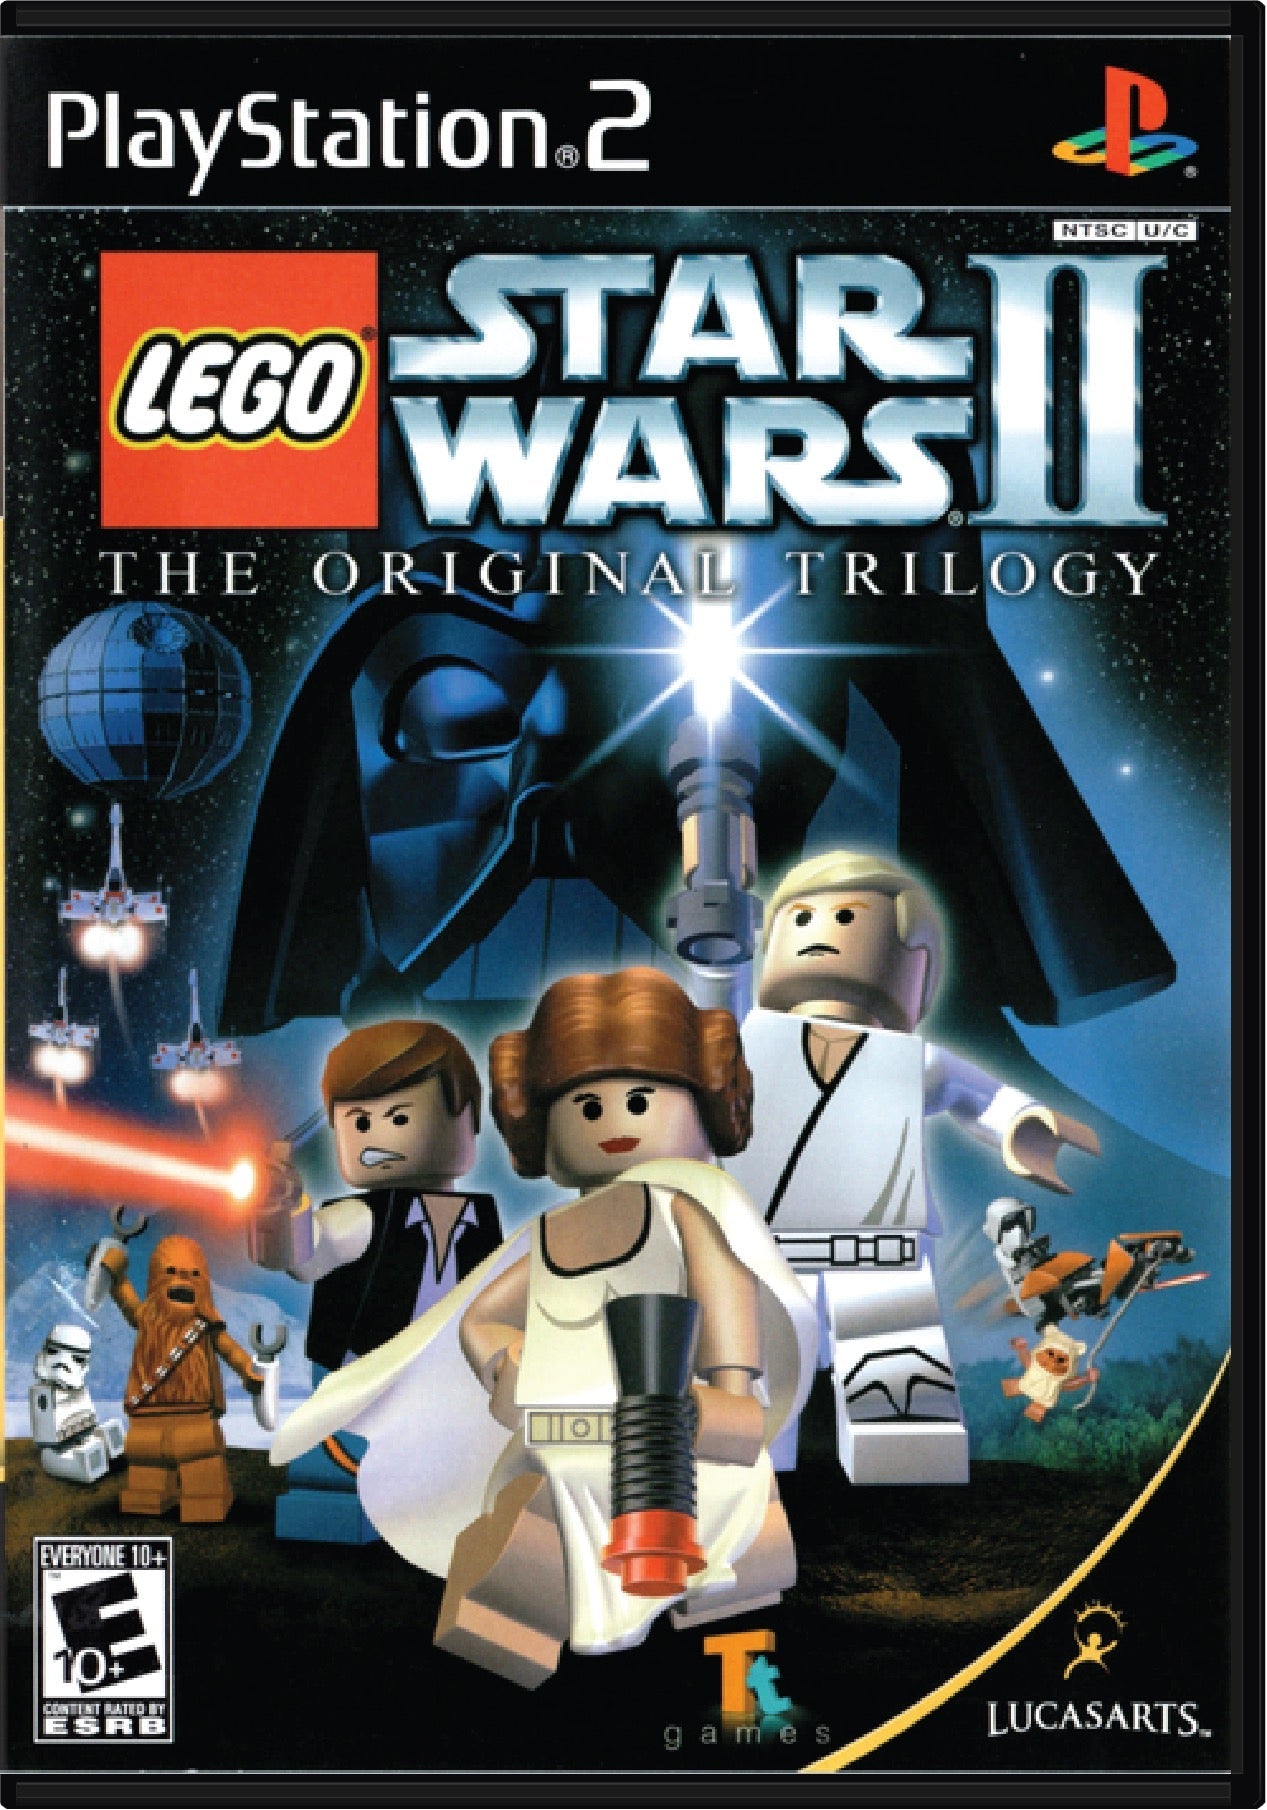 LEGO Star Wars II Original Trilogy Cover Art and Product Photo